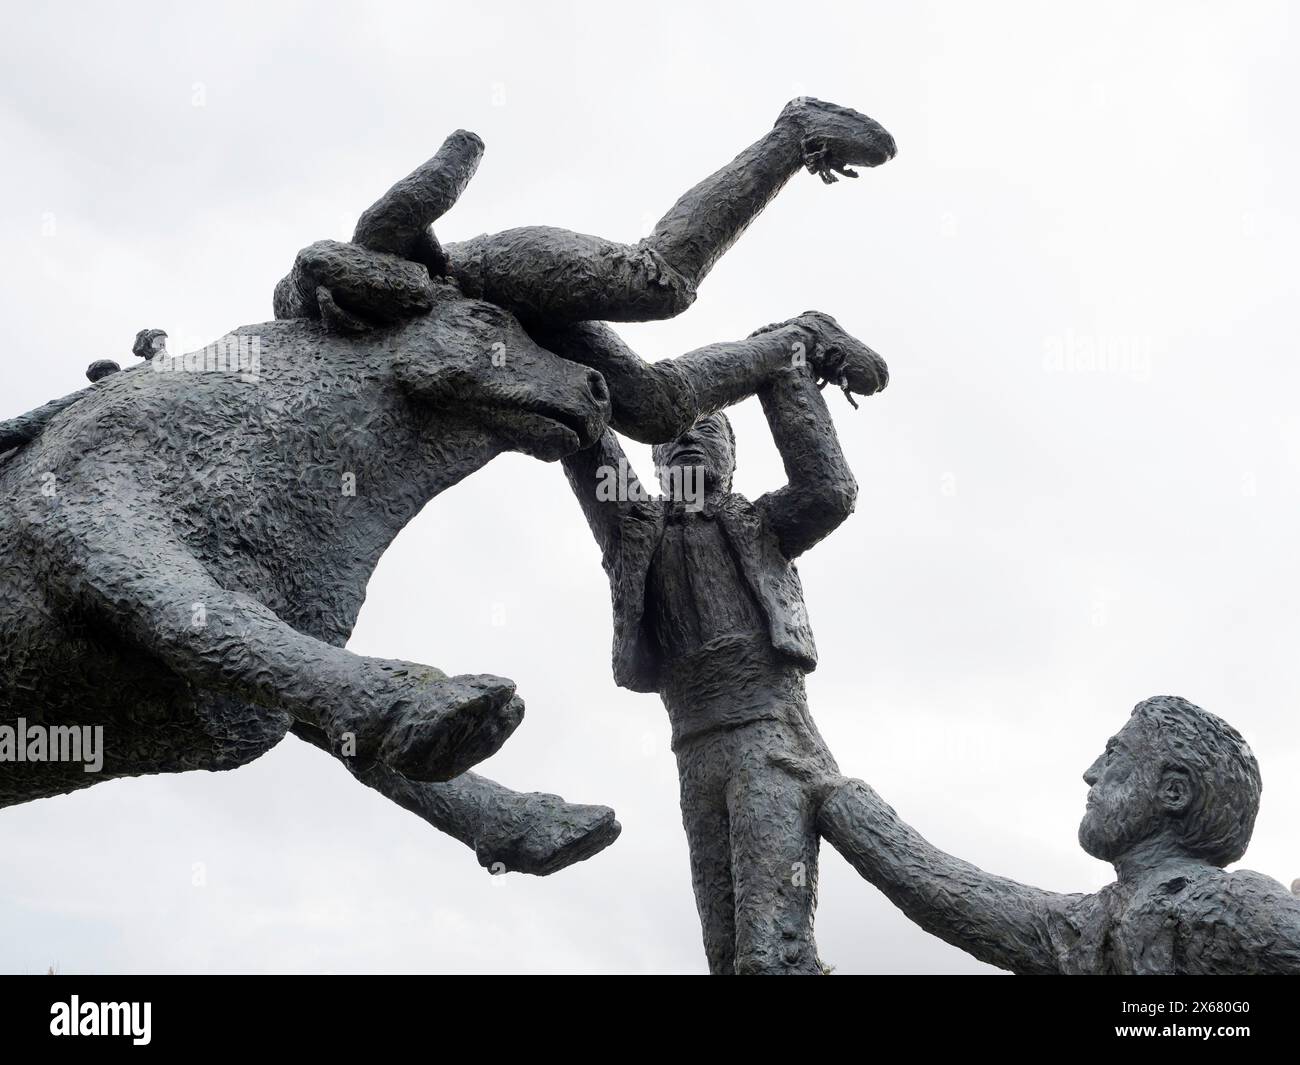 Angra do Heroismo, animal cruelty, art, Azores, bull fight, bull flight statue outside bull ring, man and animal, play, Portugal, sculpture, Sport utility vehicle, Terceira, traditions Stock Photo